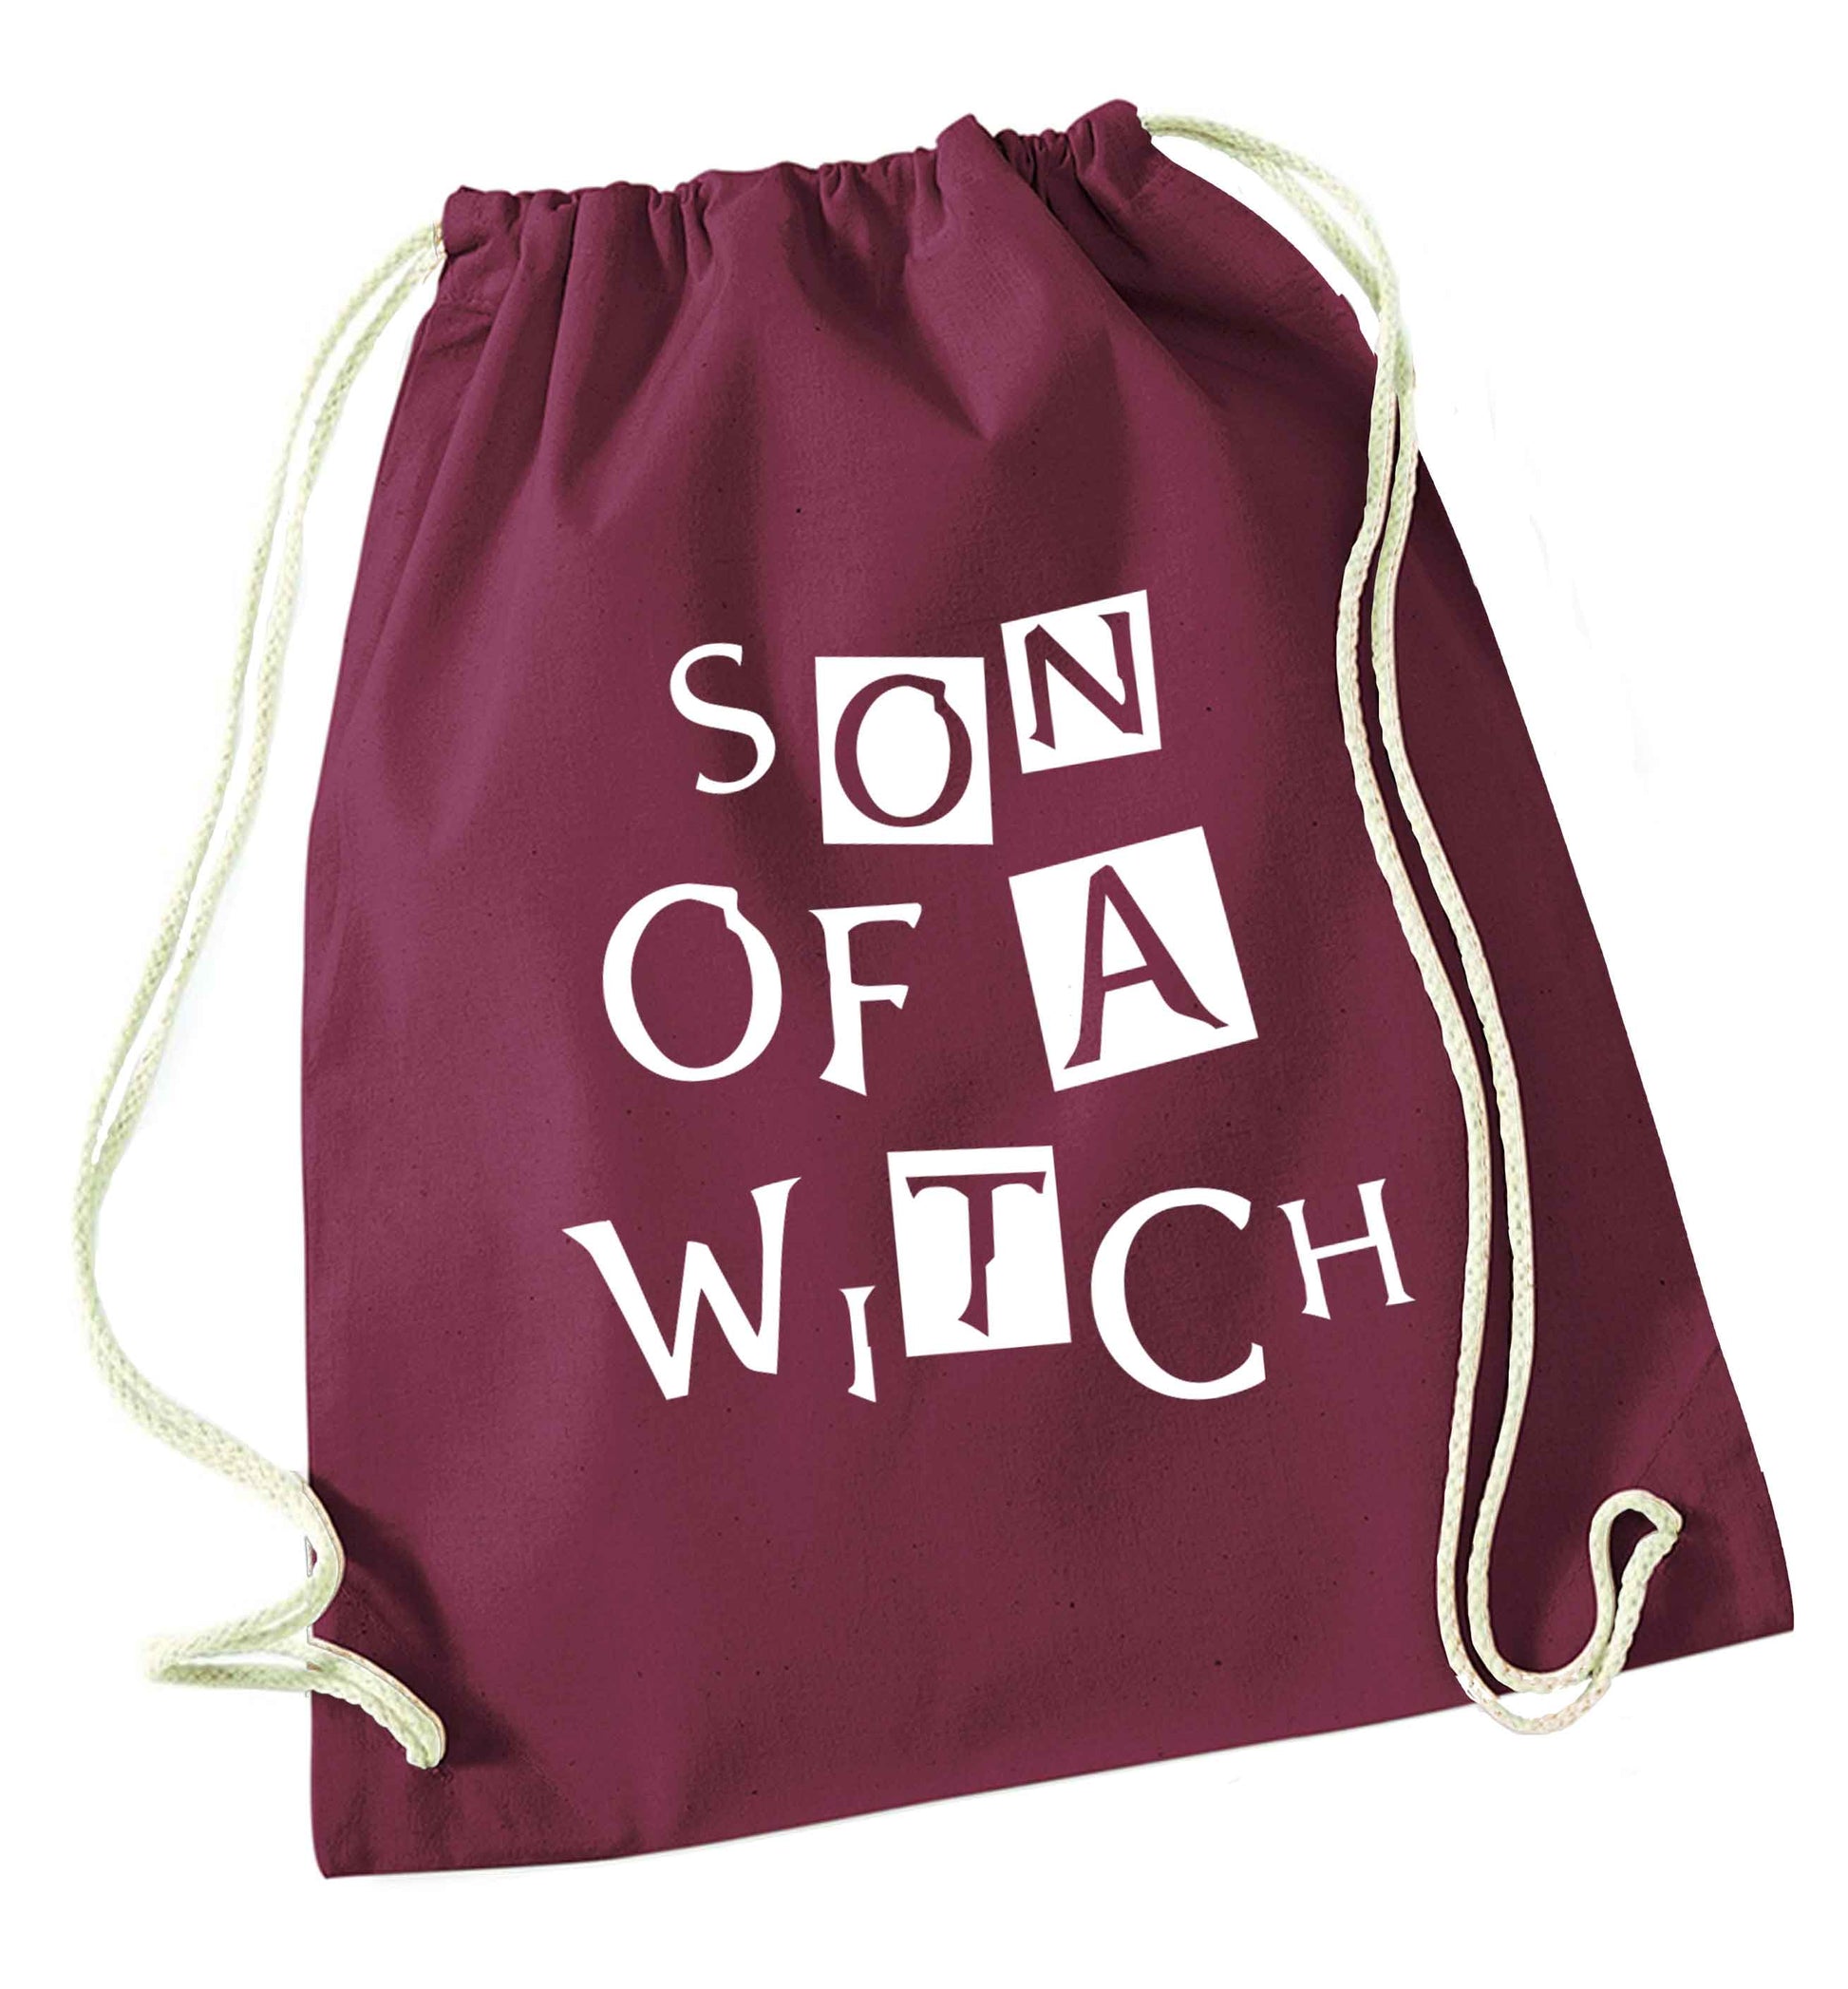 Son of a witch maroon drawstring bag